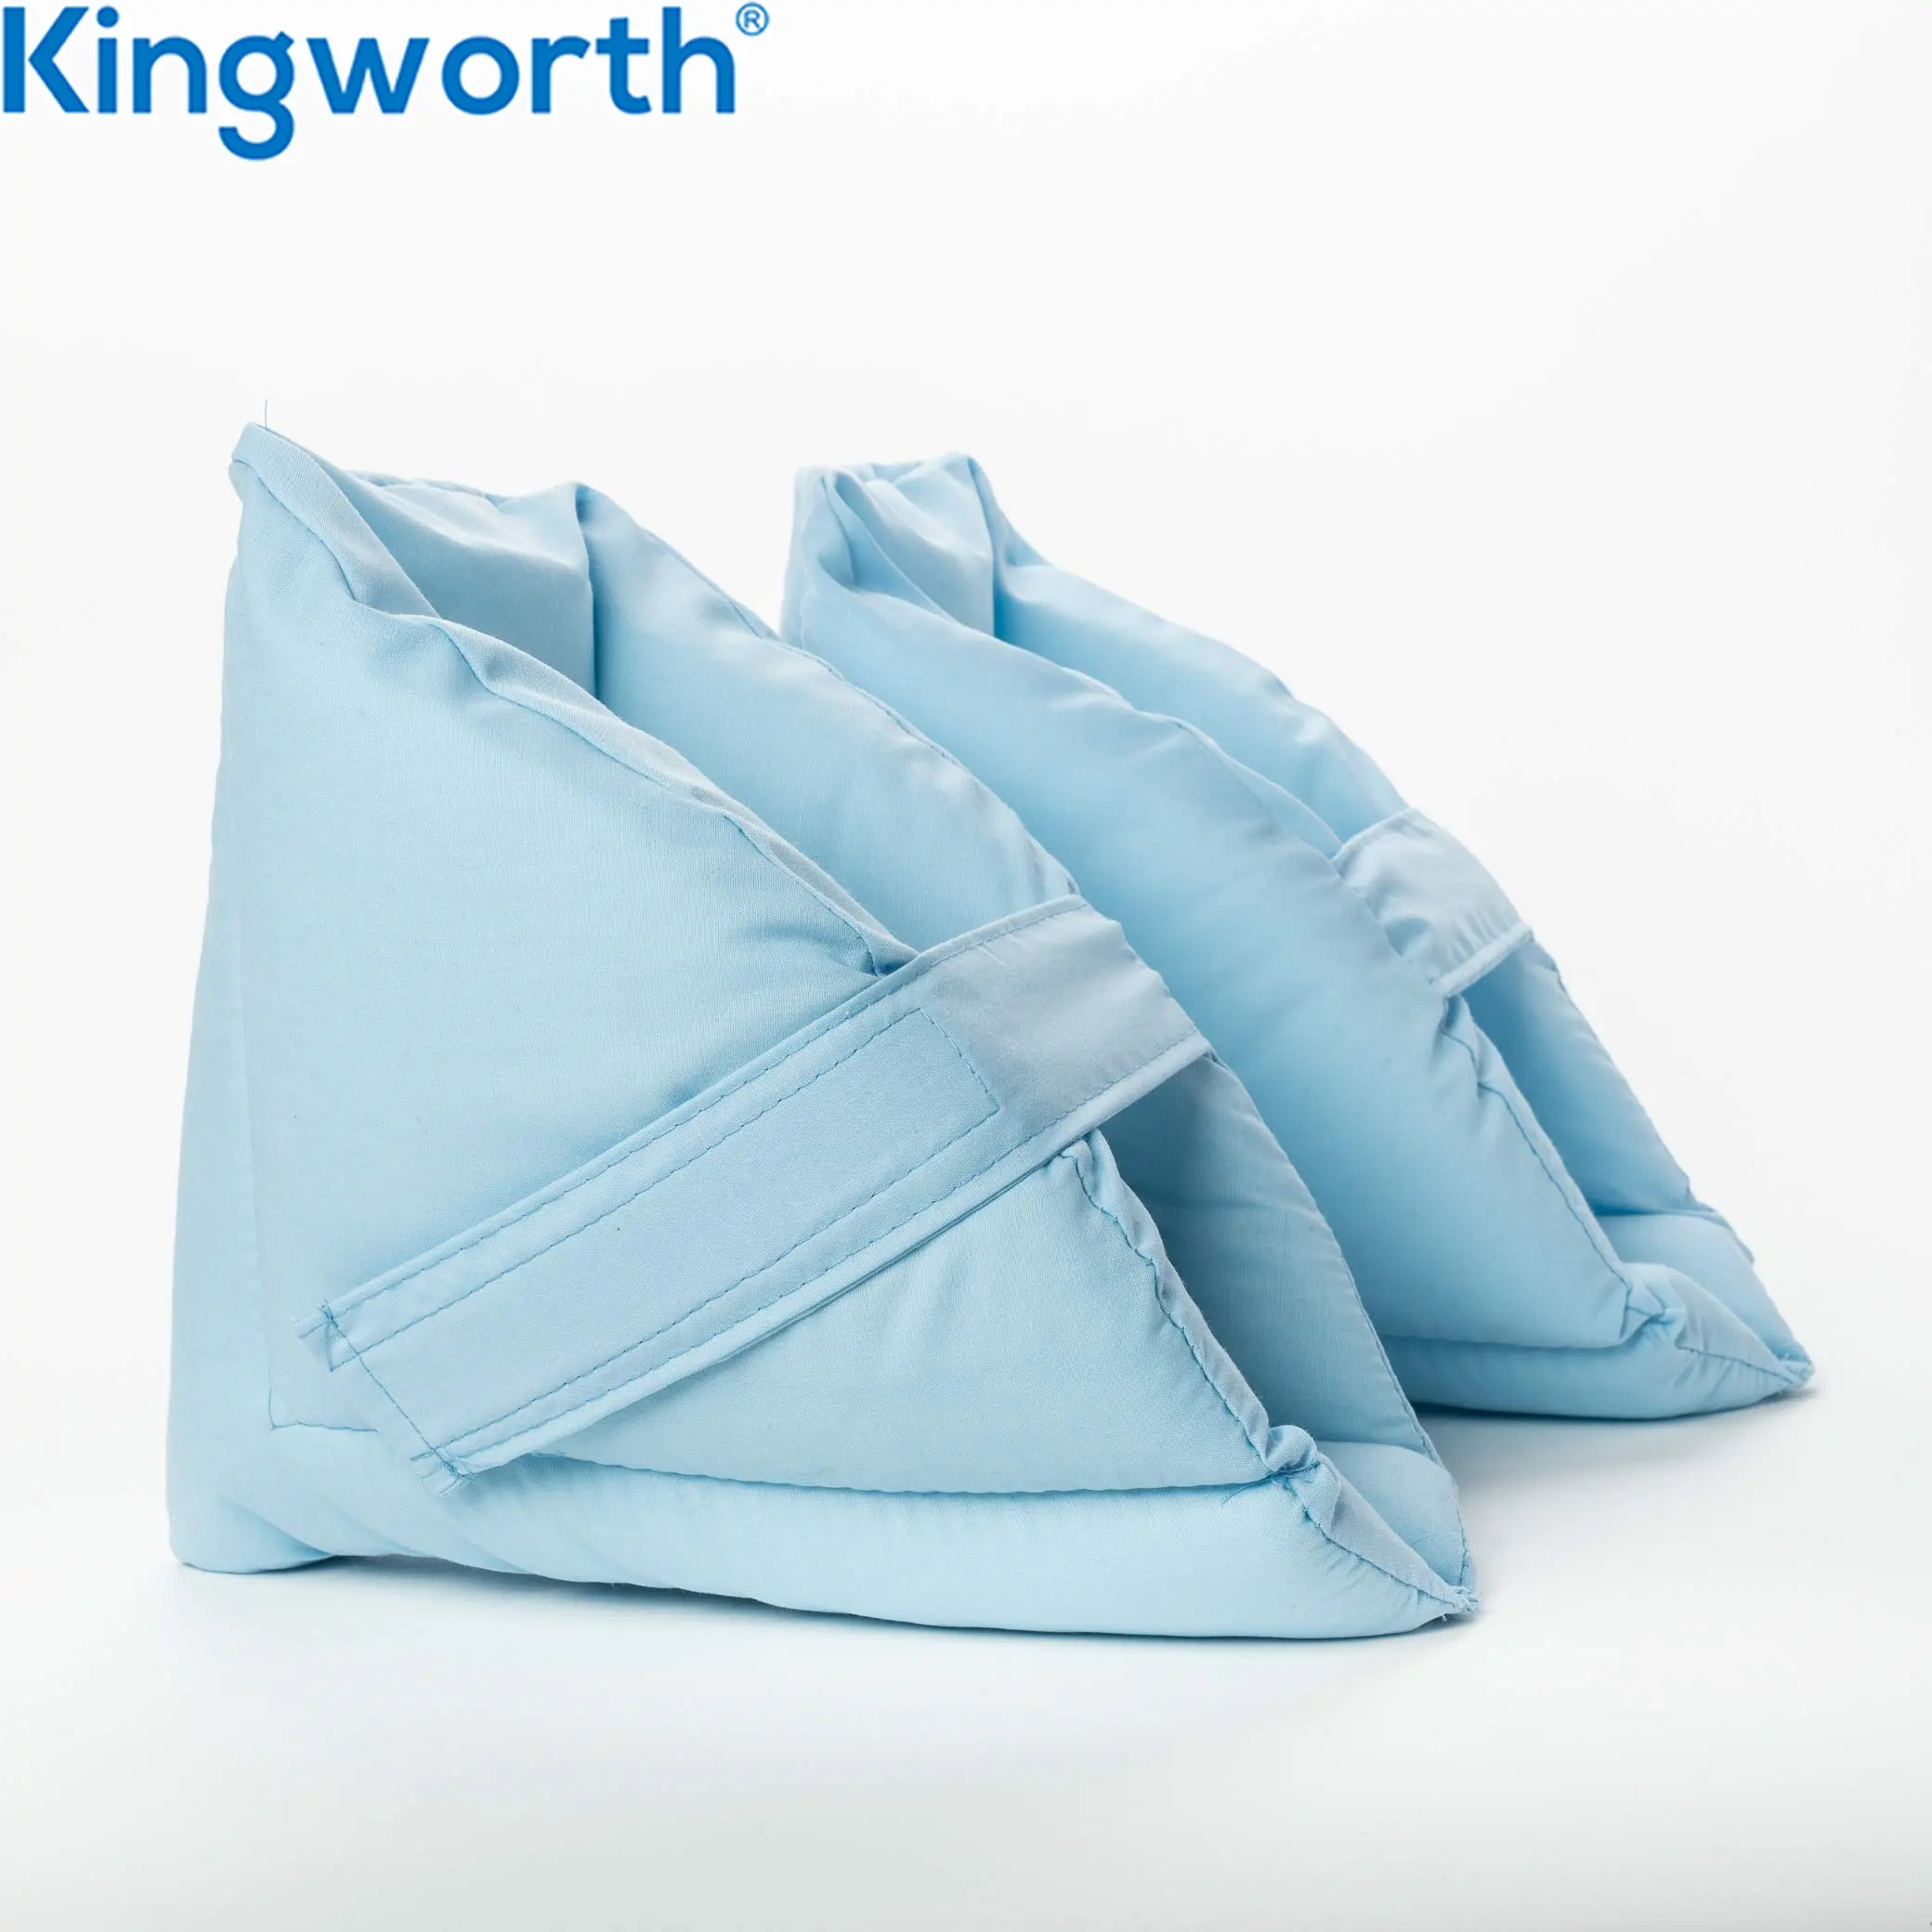 Kingworth Protection Relief Cushion piedi gonfi Comfort Foot Pillow Heel Protector